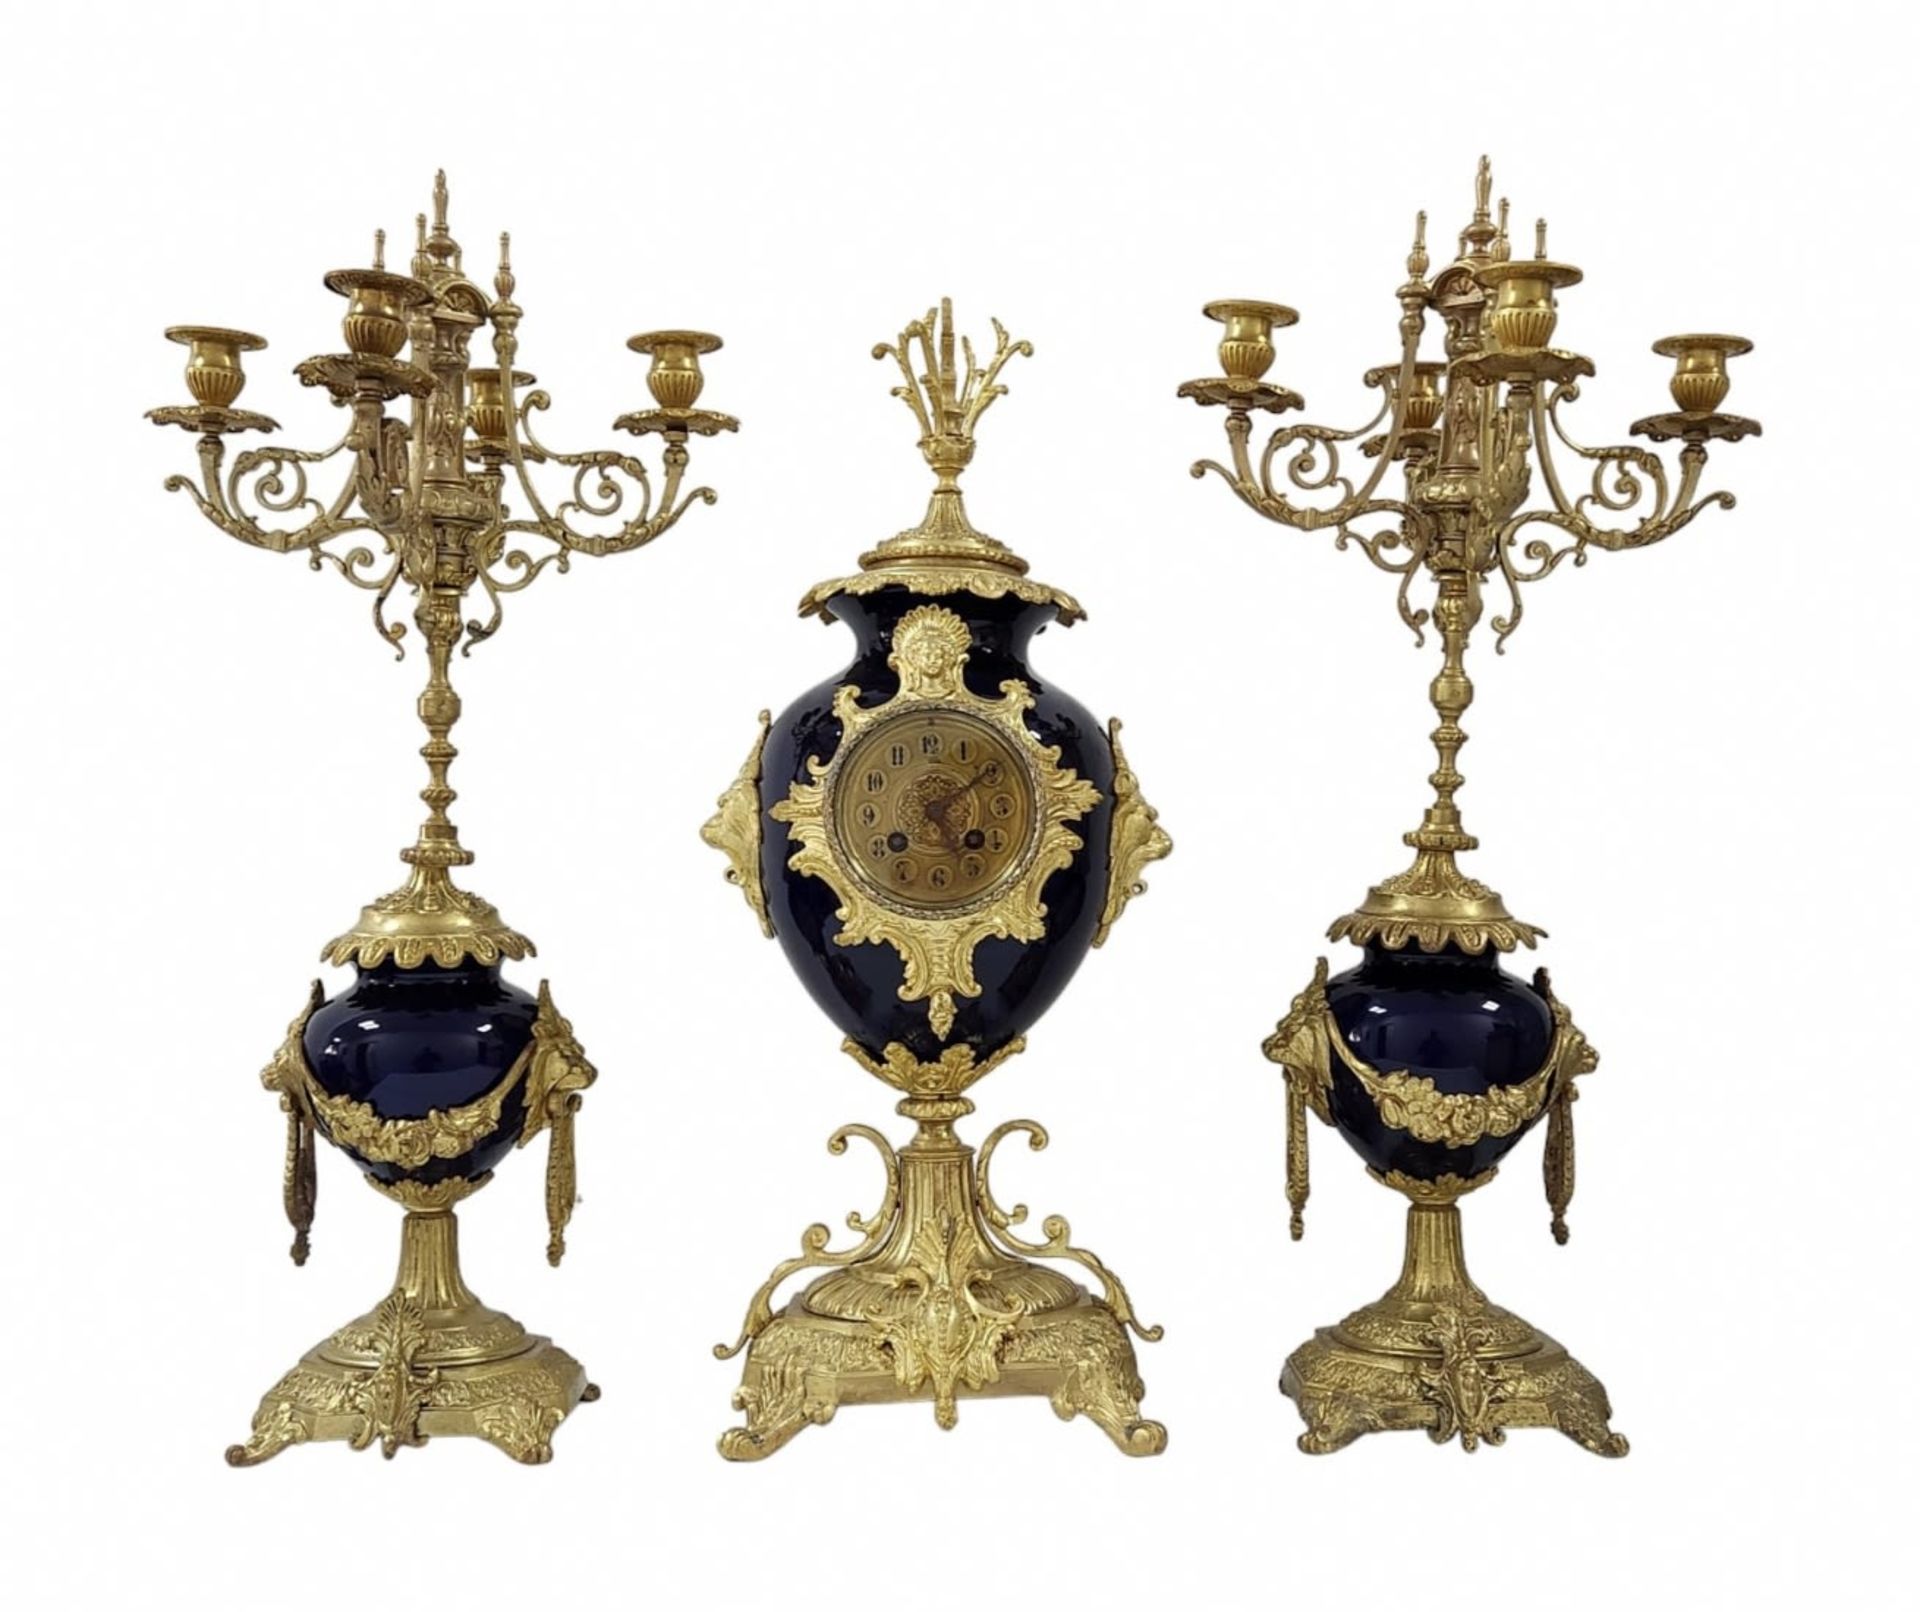 Antique French Garniture, impressively large and luxurious, includes a mantle clock and a pair of